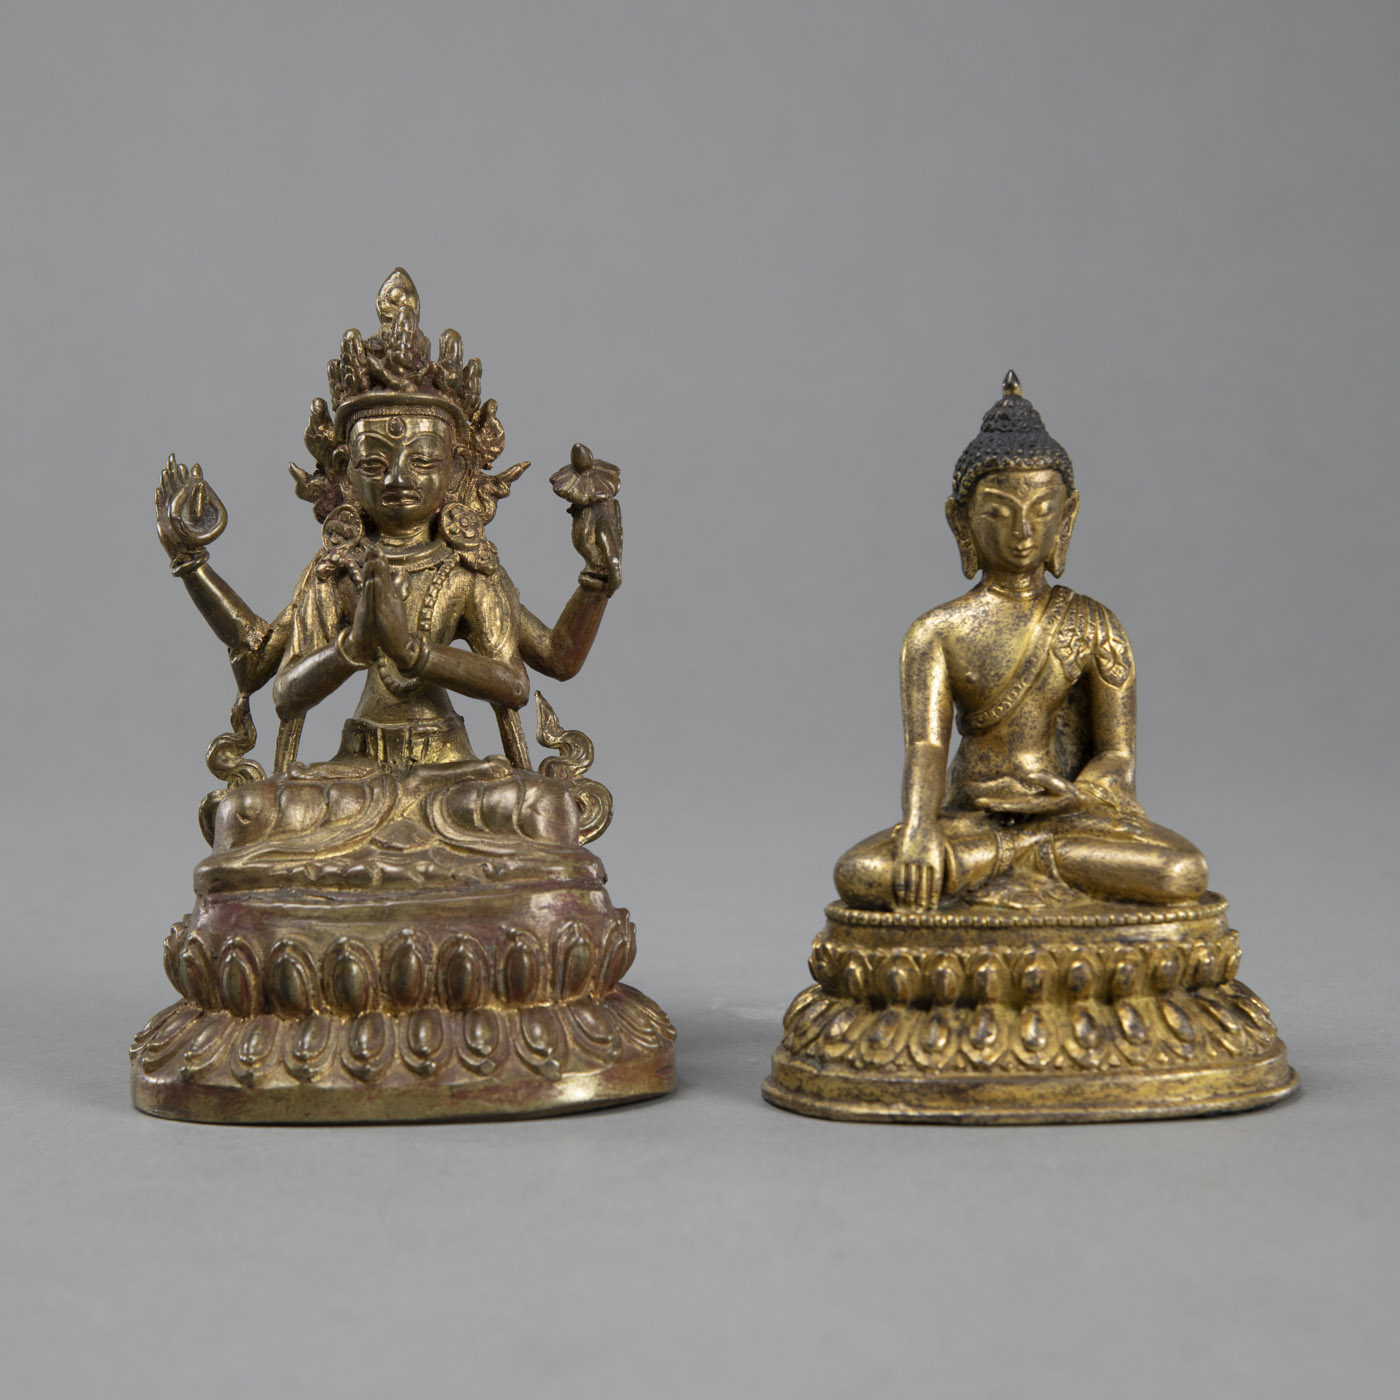 A GILT BRONZE SEATED BUDDHA SHAKYAMUNI AND A LACQUERED AND GILT BRONZE FIGURE OF FOUR-ARMED AVALOKI